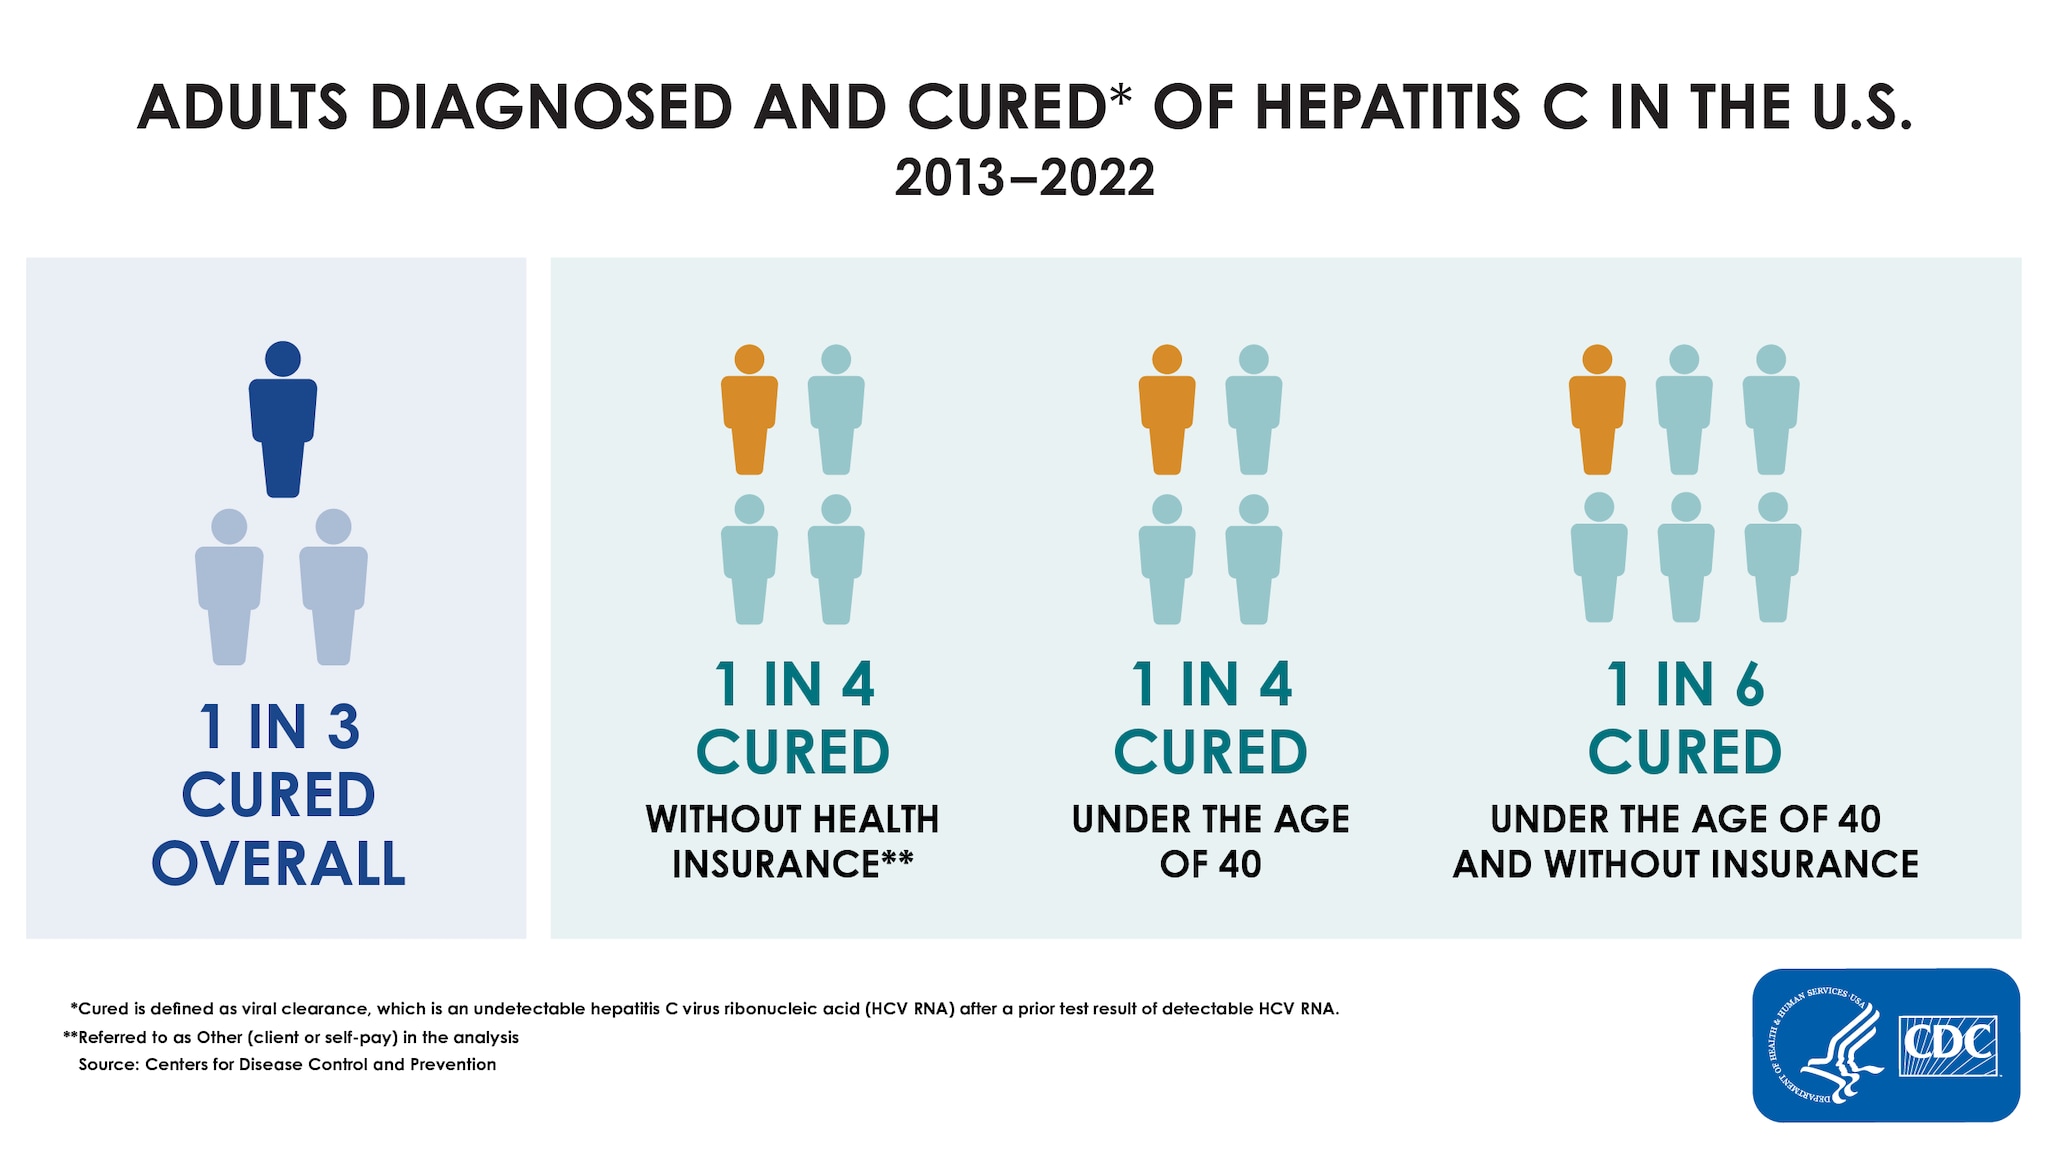 Adults Diagnosed and Cured of Hepatitis C in the U.S. 2013 - 2022